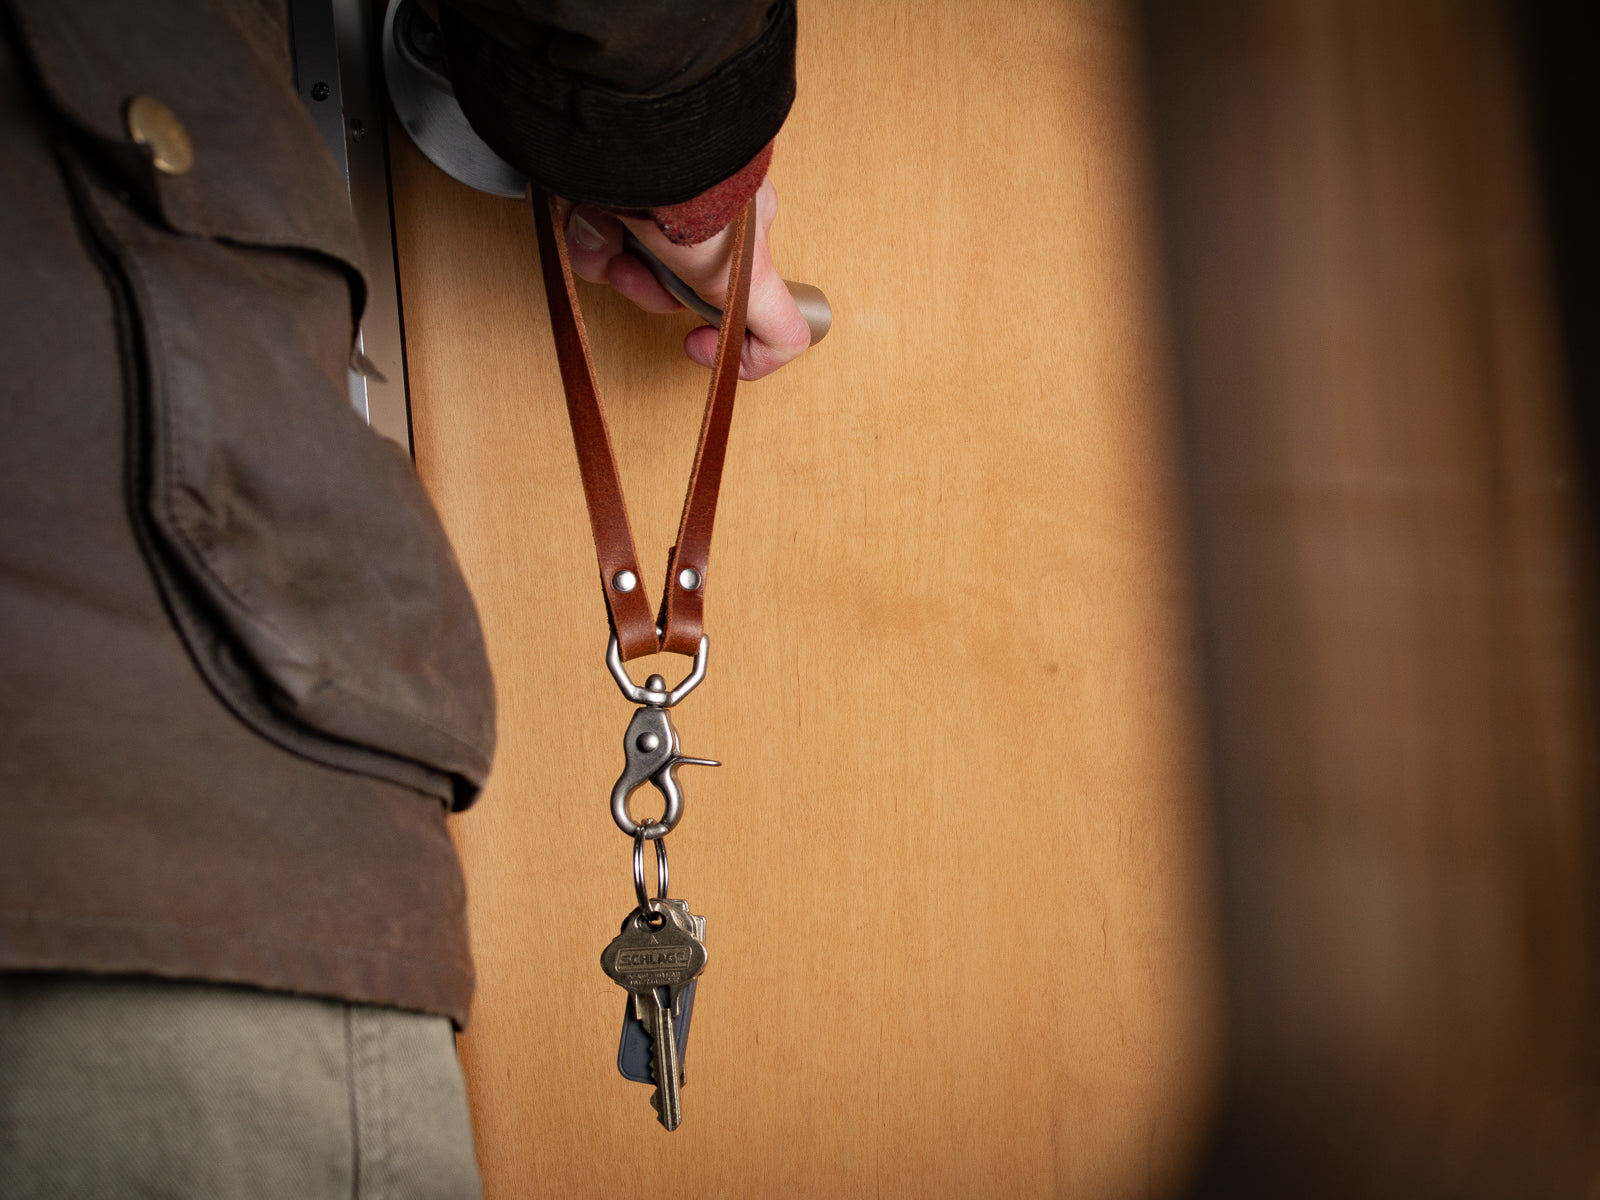 Key Lanyard in Tan and Nickel hardware show in use with someone opening a door.